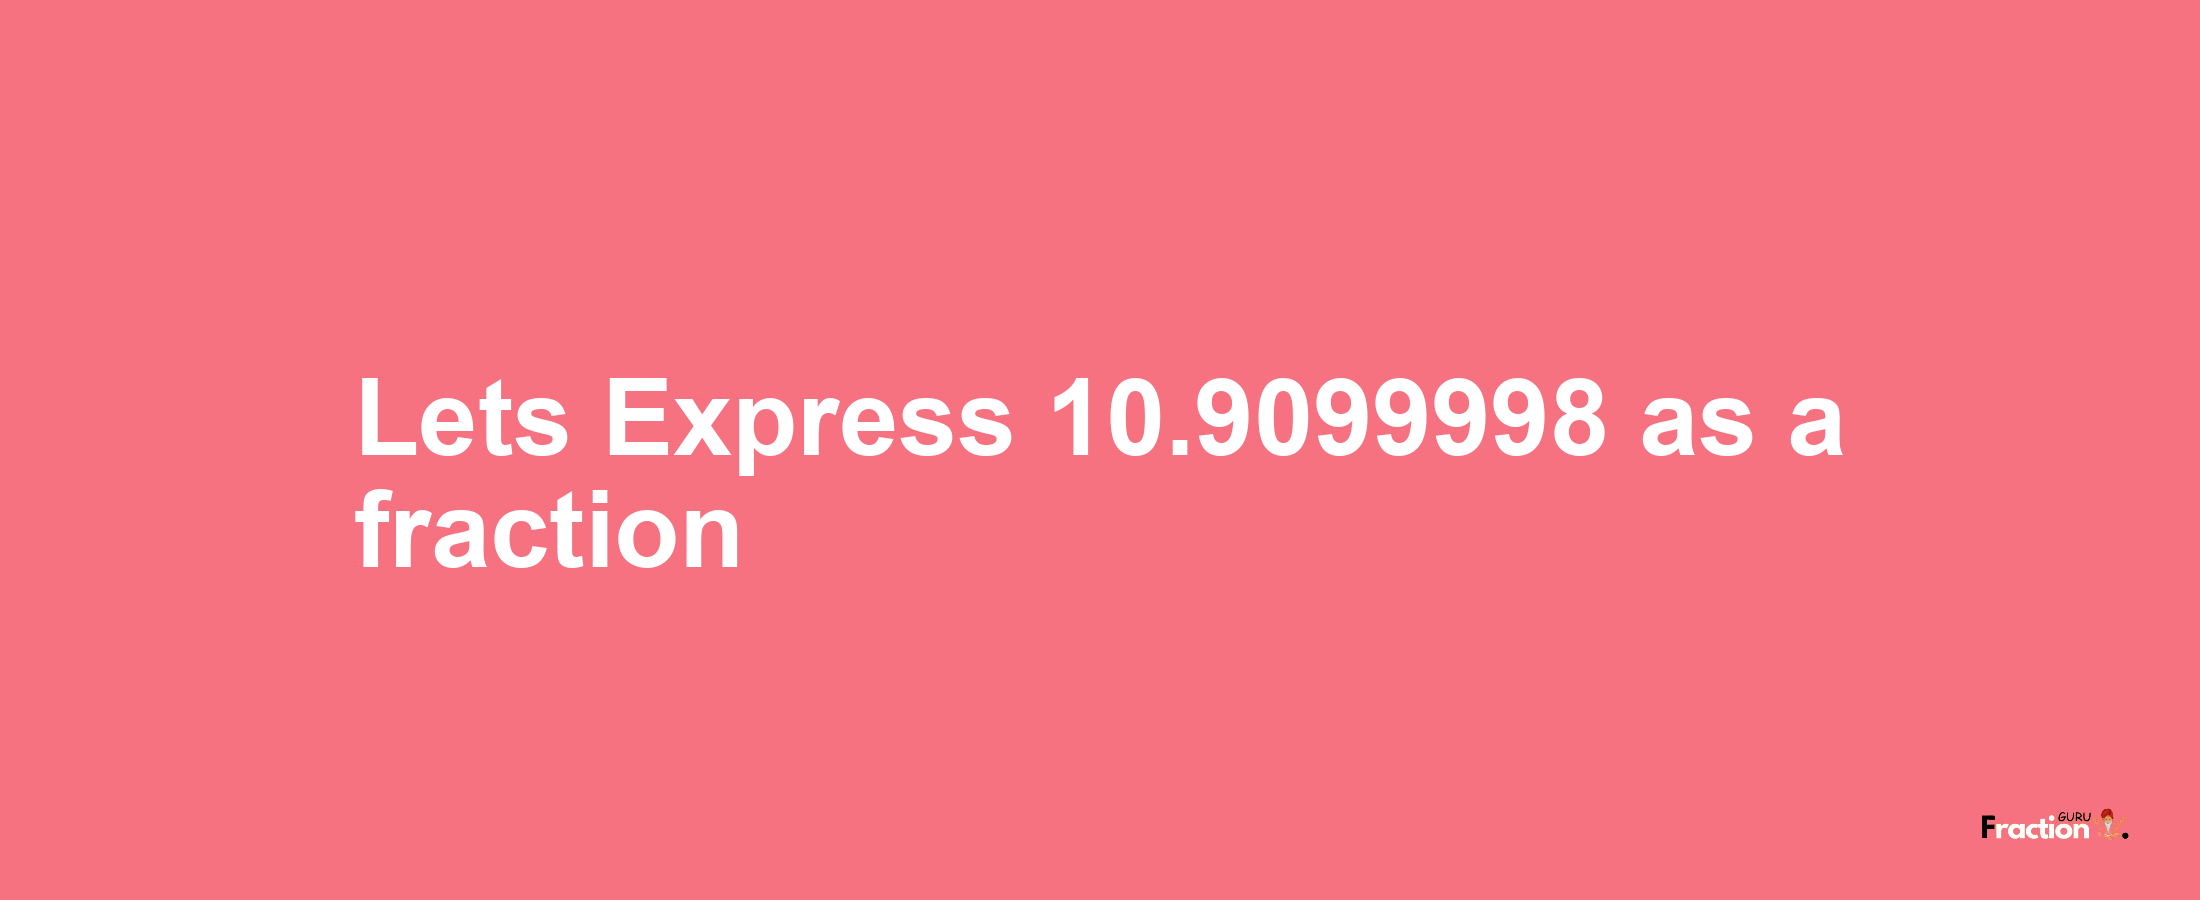 Lets Express 10.9099998 as afraction